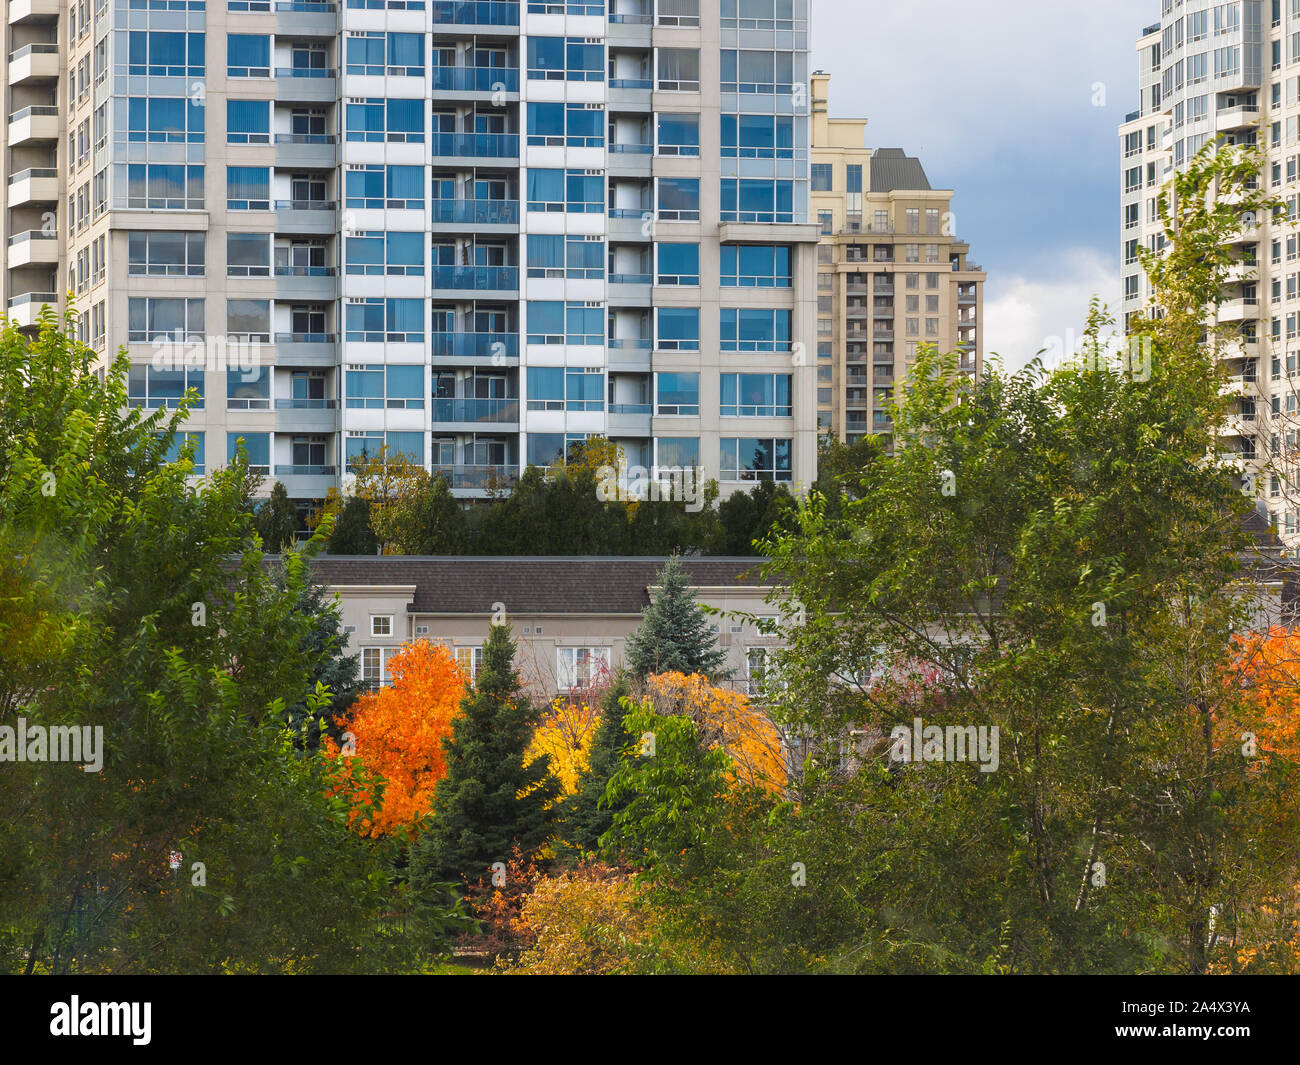 Building windows reflecting blue sky, located behind the tree line in autumn. Stock Photo